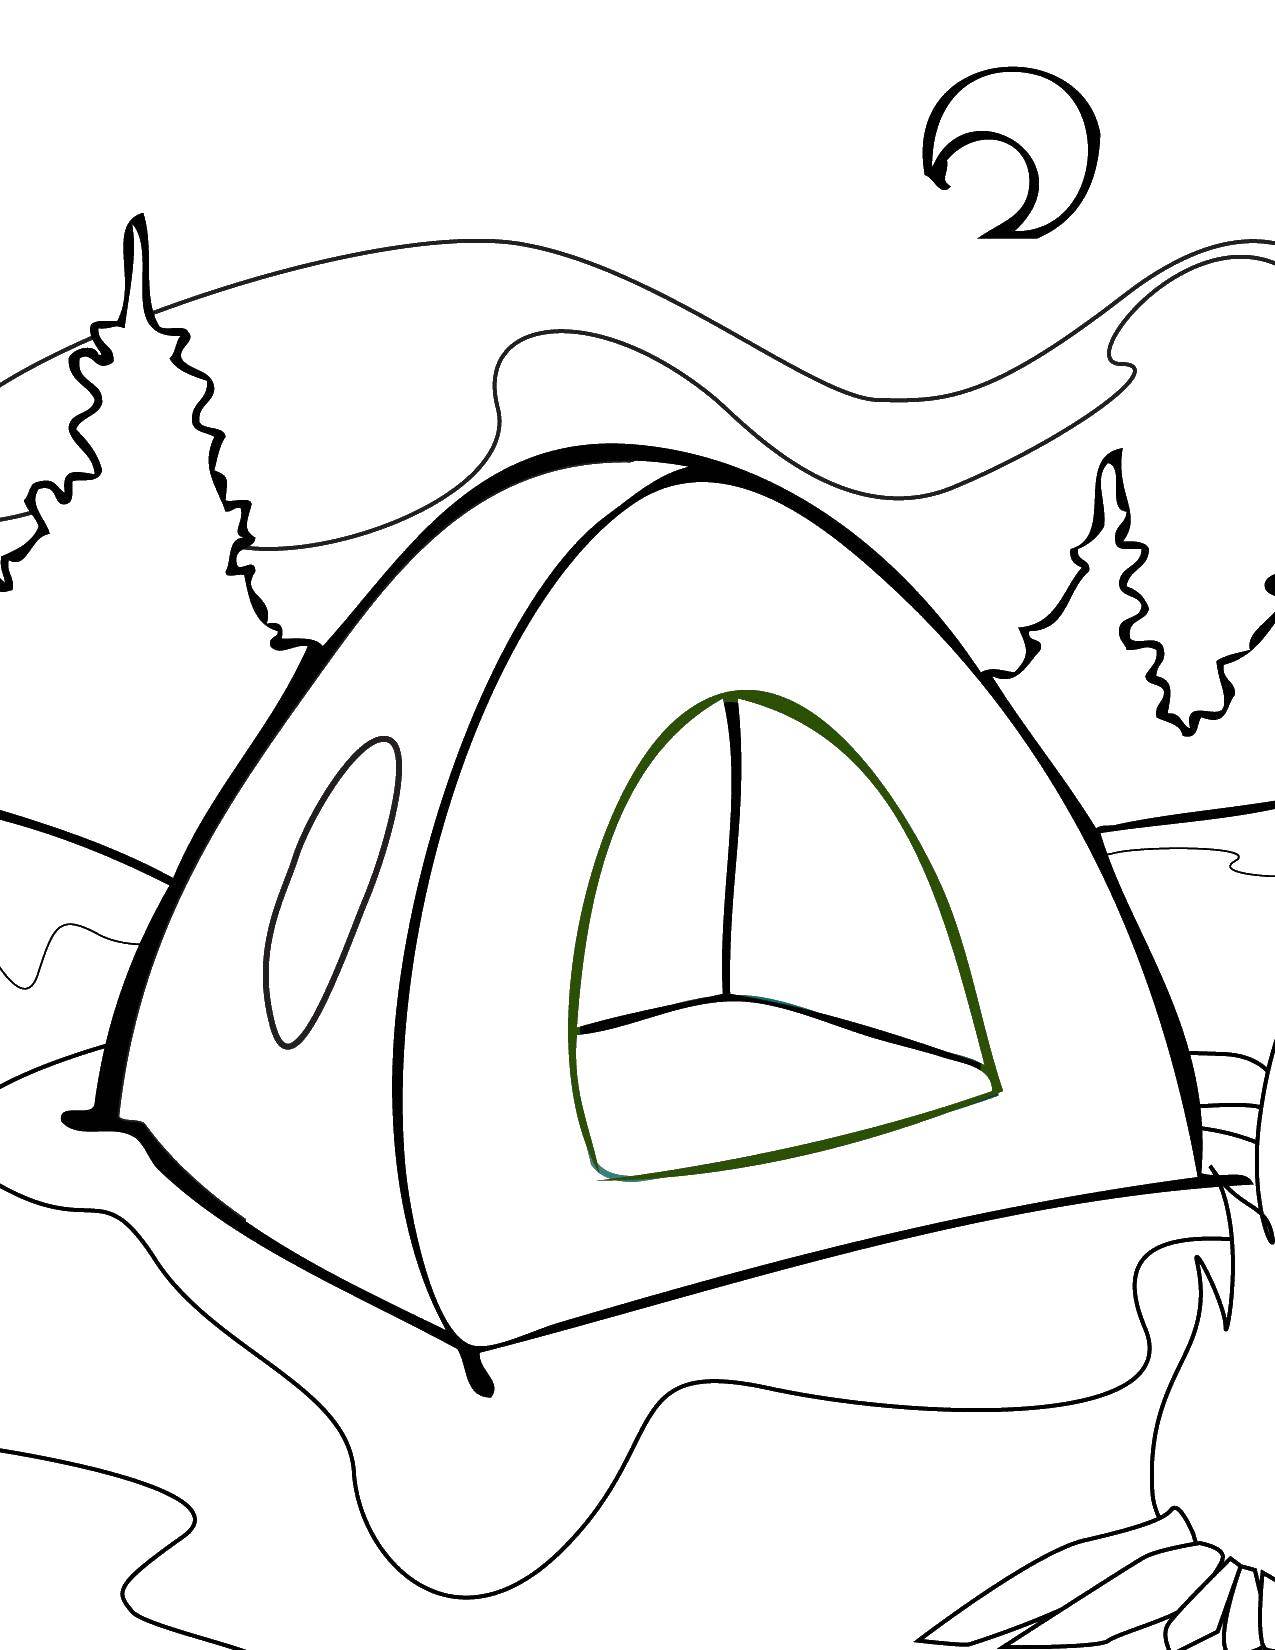 Coloring Tent. Category Camping. Tags:  Leisure, tent.